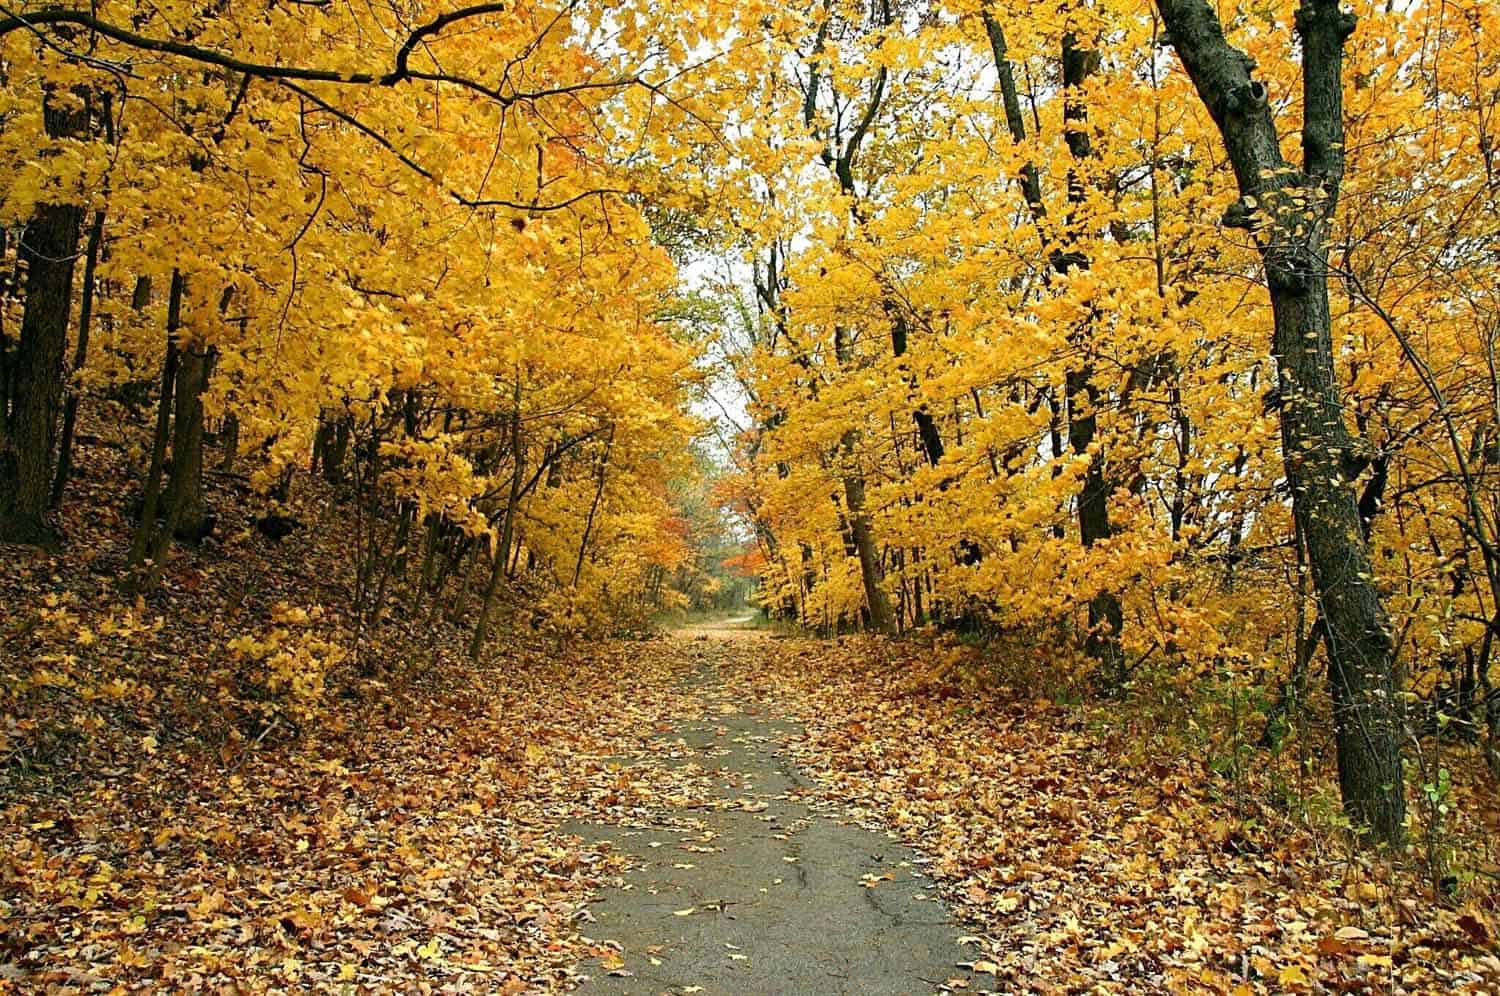 Weston Bend State Park paved bike trail under autumn leaves